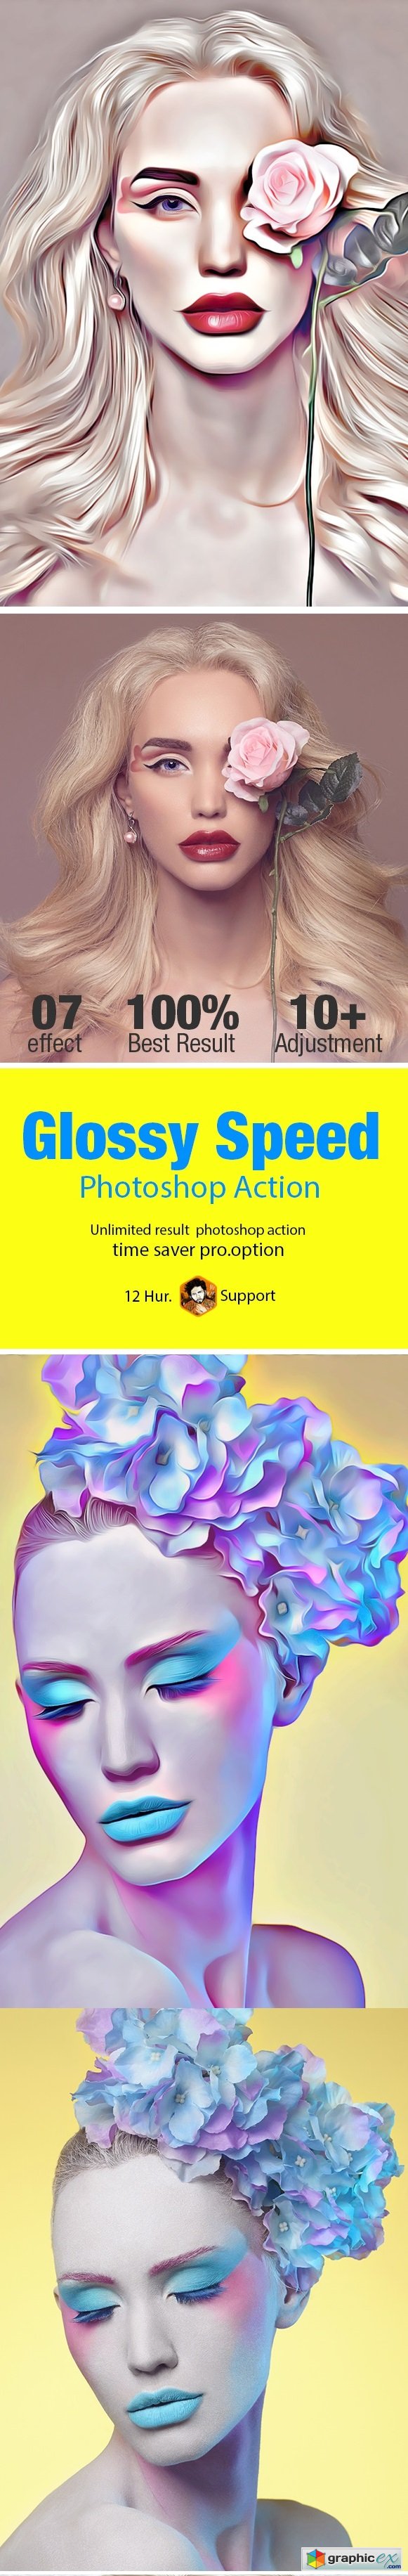 Glossy Speed Art Action